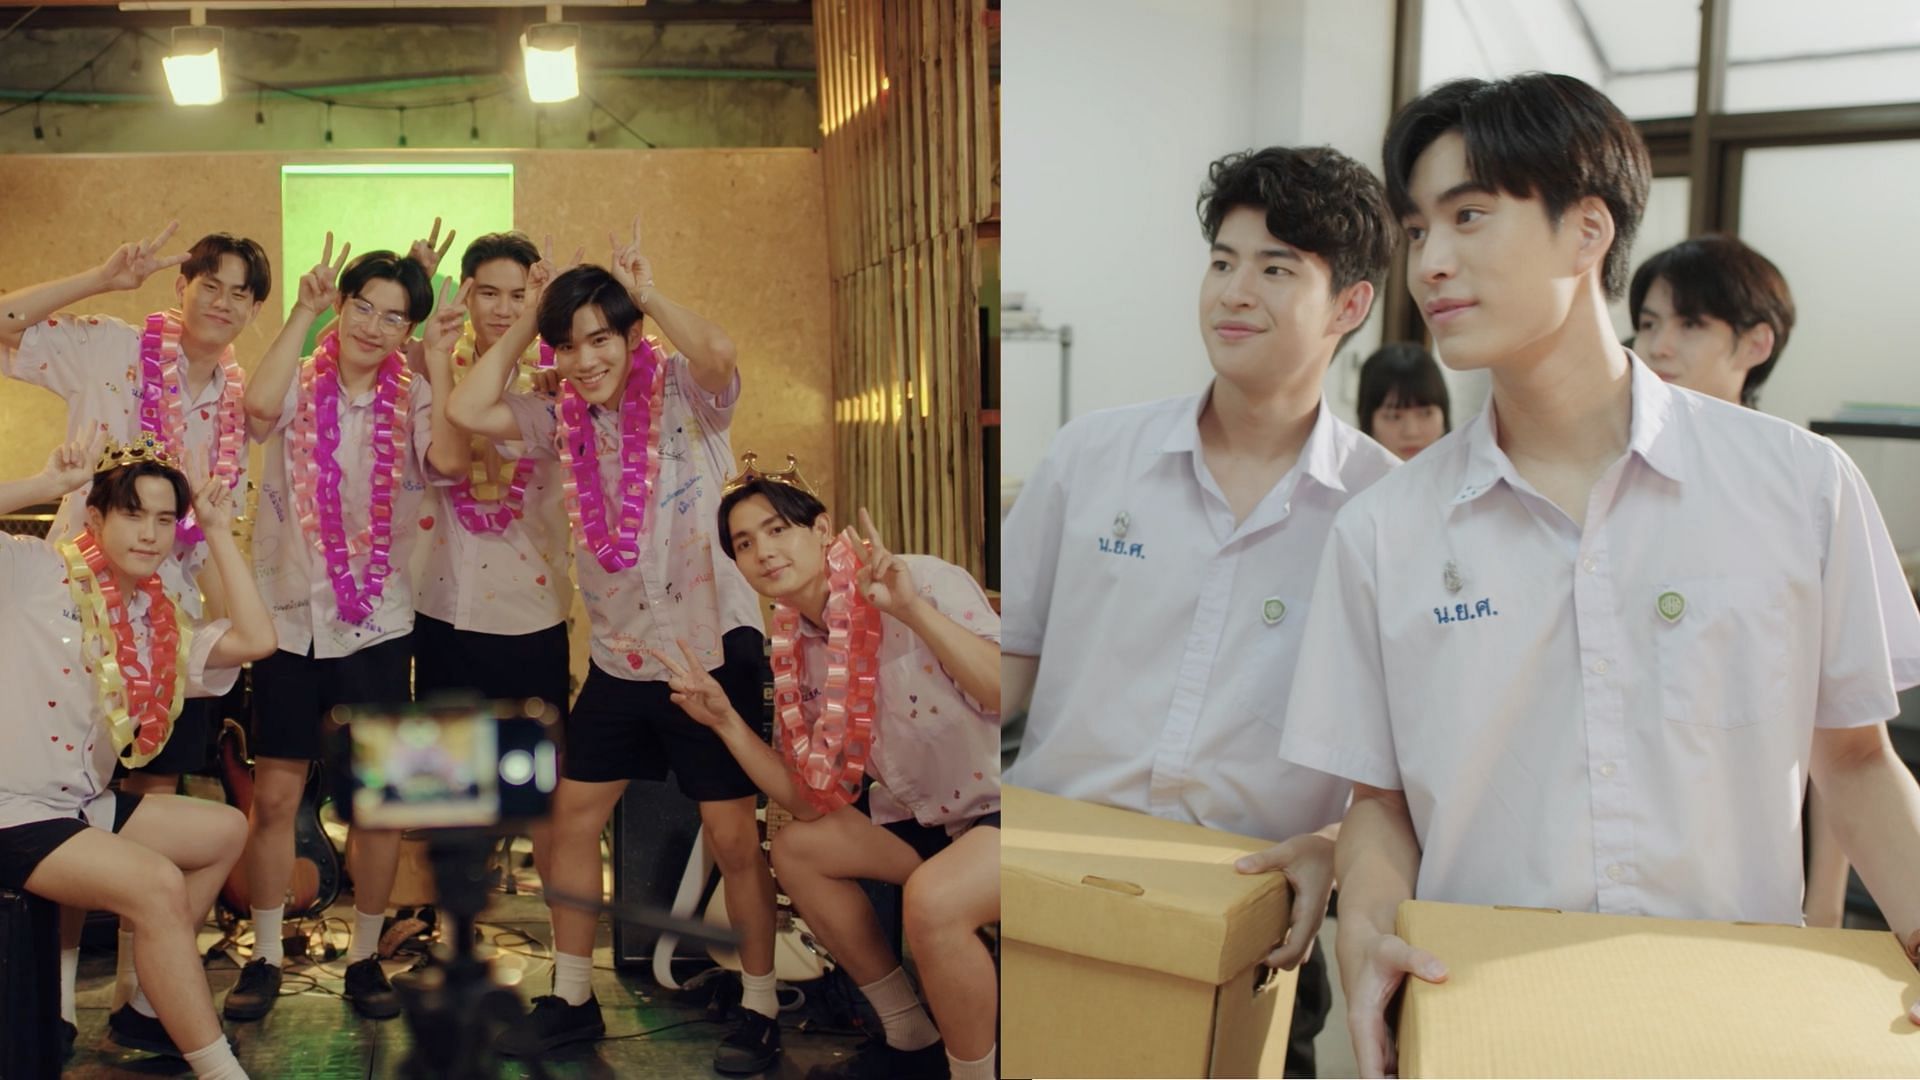 Still from My School President episode 12 (Images via GMMTV)